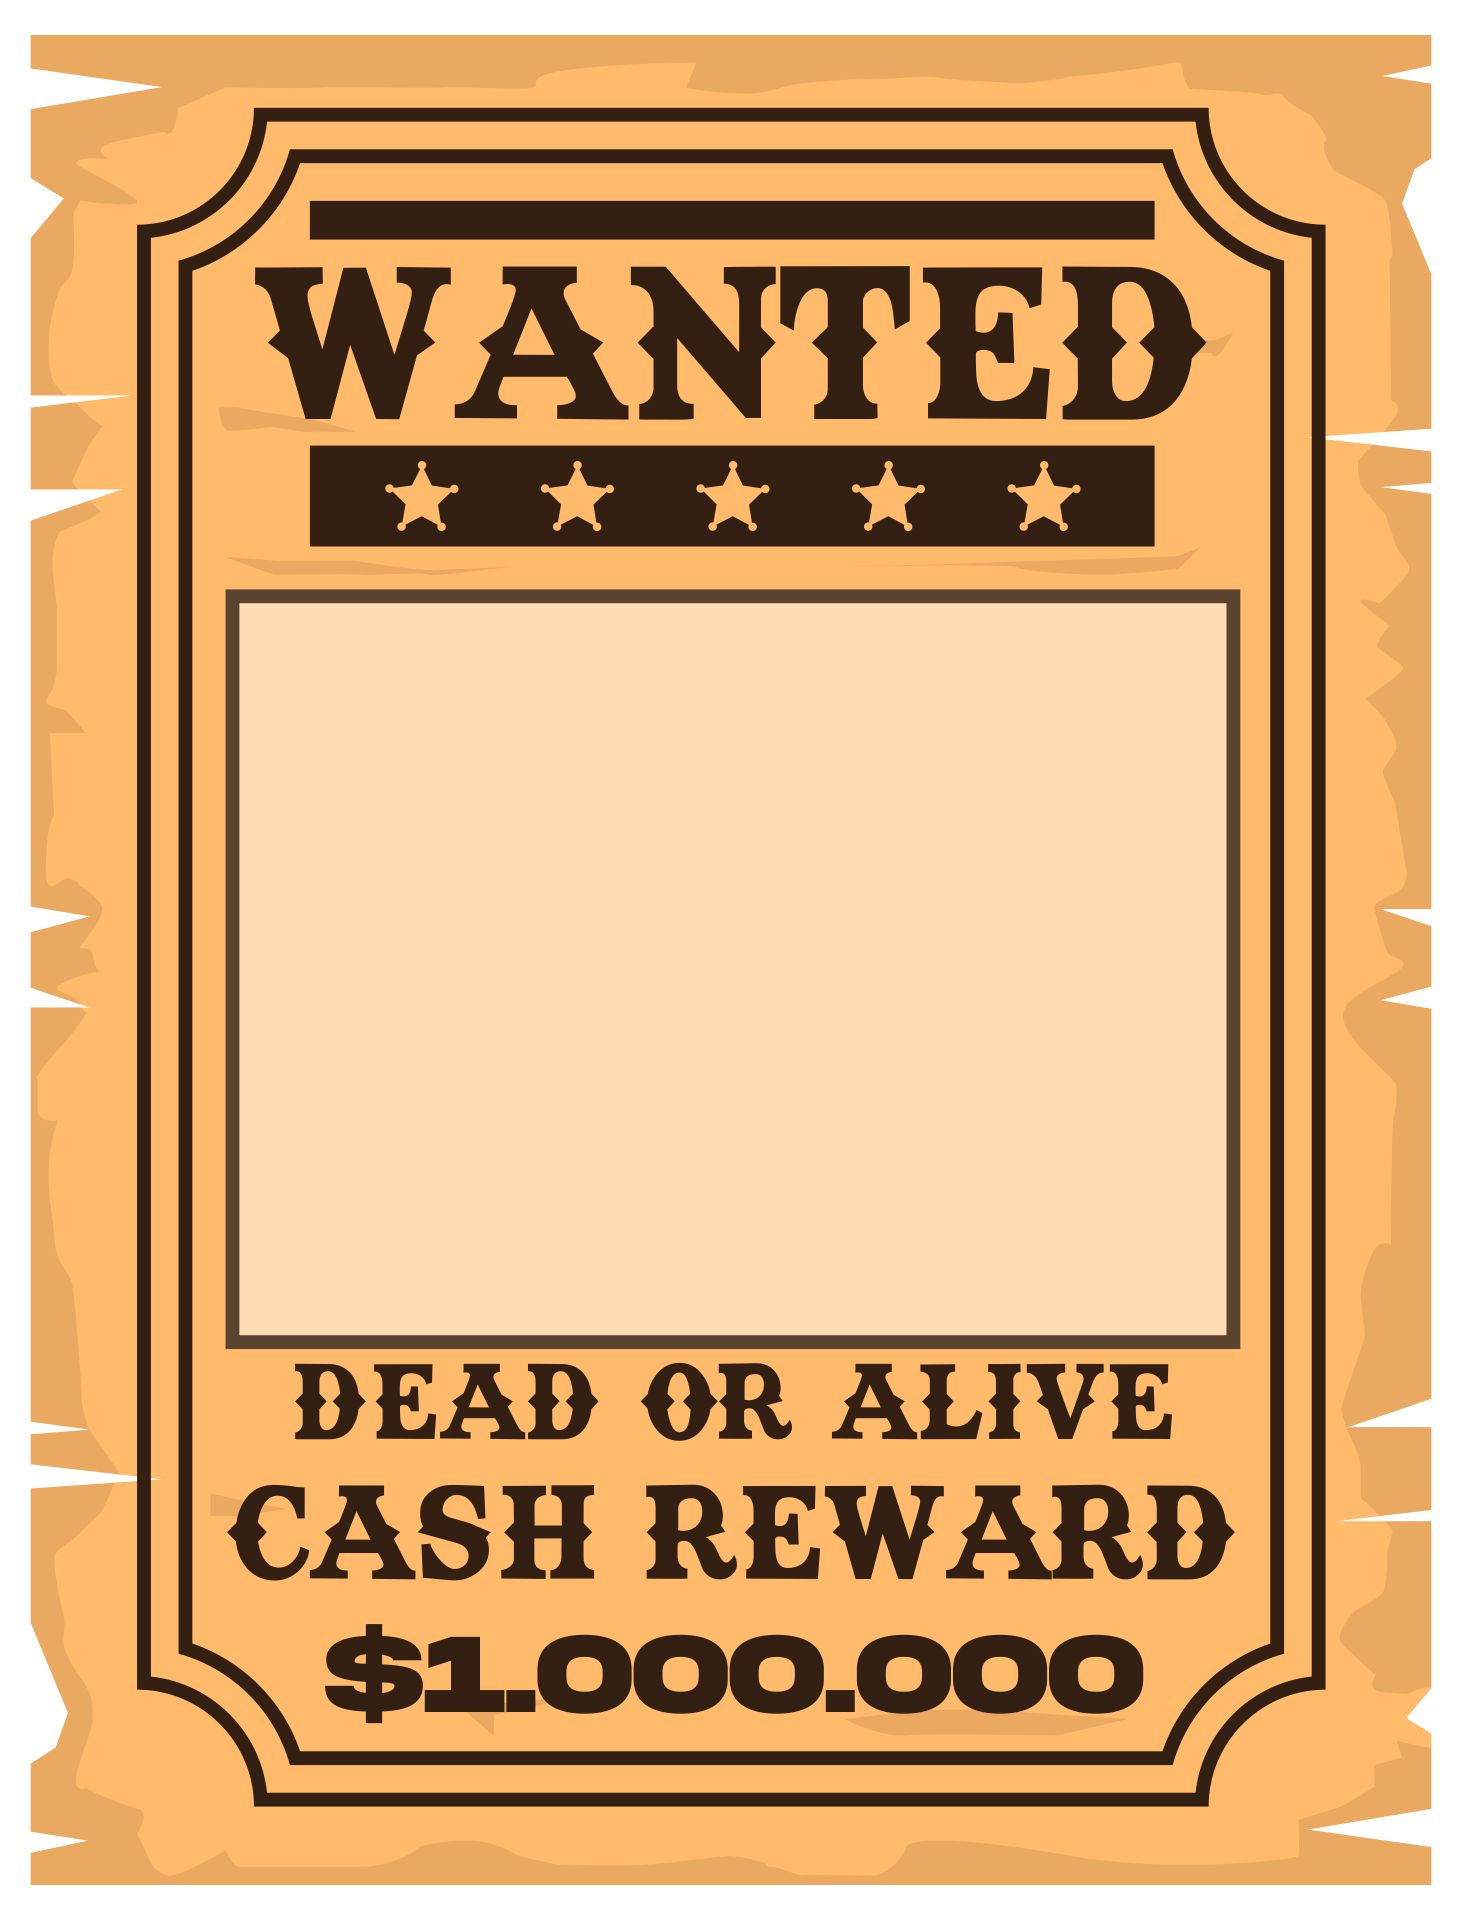 Wanted poster template - kizahowto